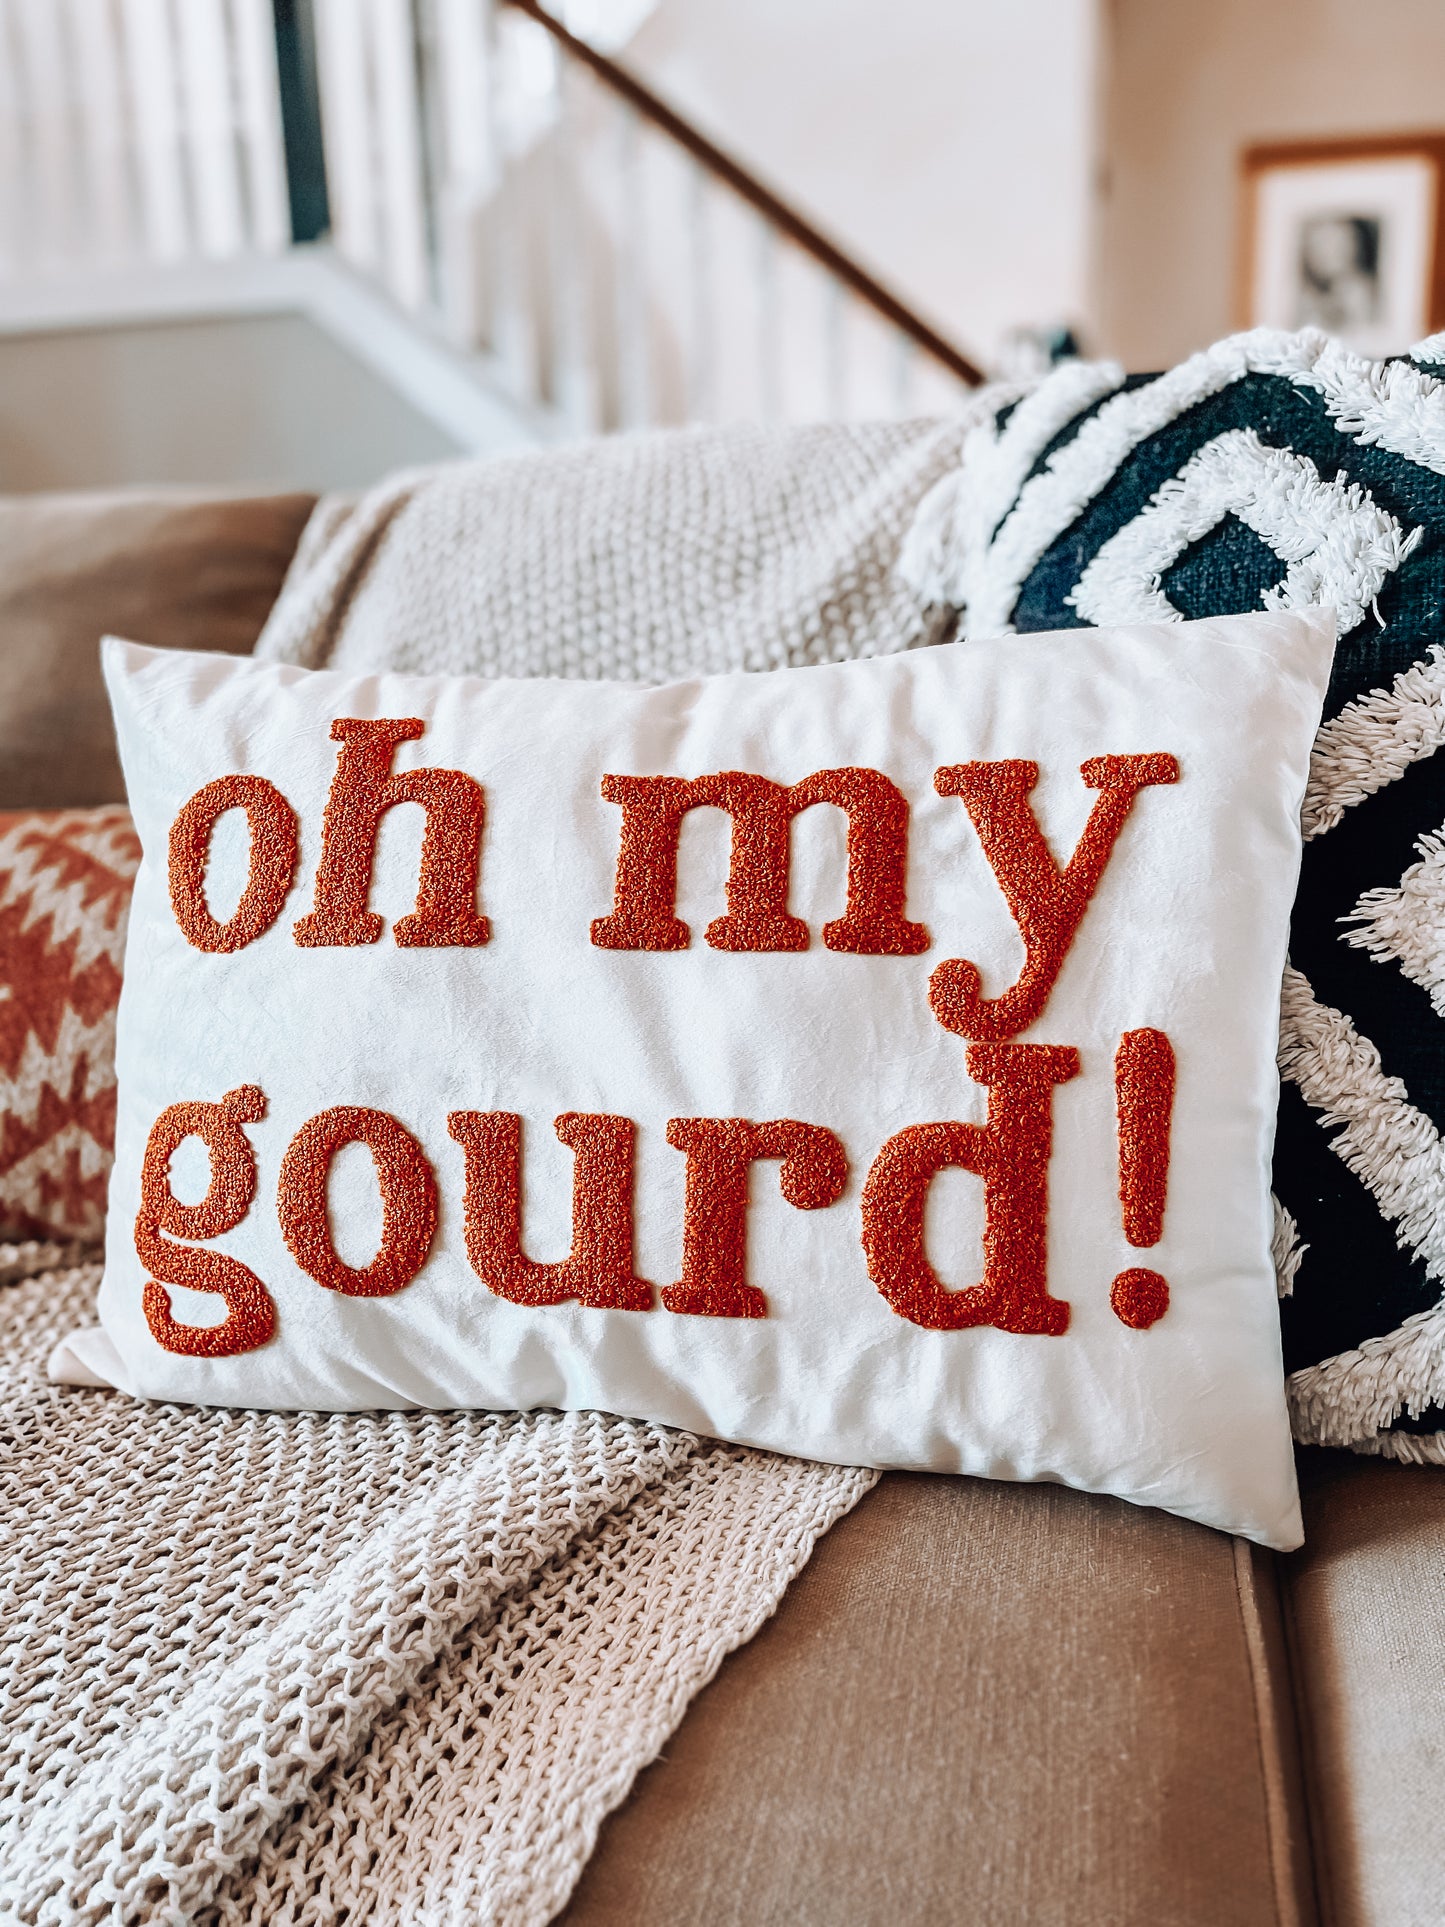 Oh My Gourd' Decorative Pillow